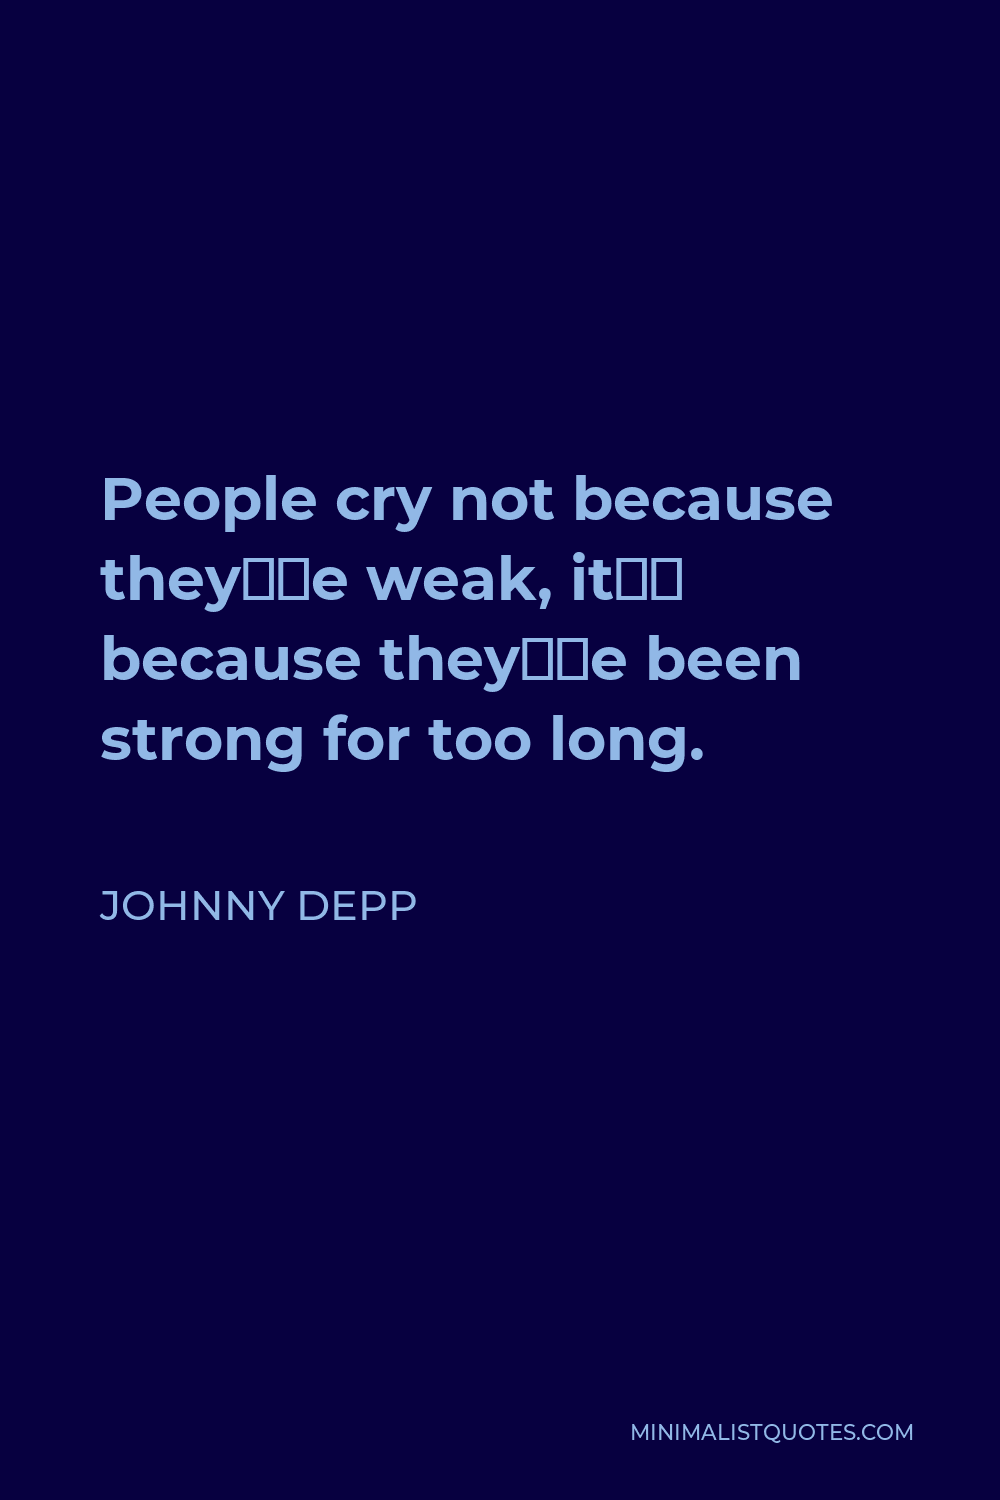 Johnny Depp Quote - People cry not because they’re weak, it’s because they’ve been strong for too long.